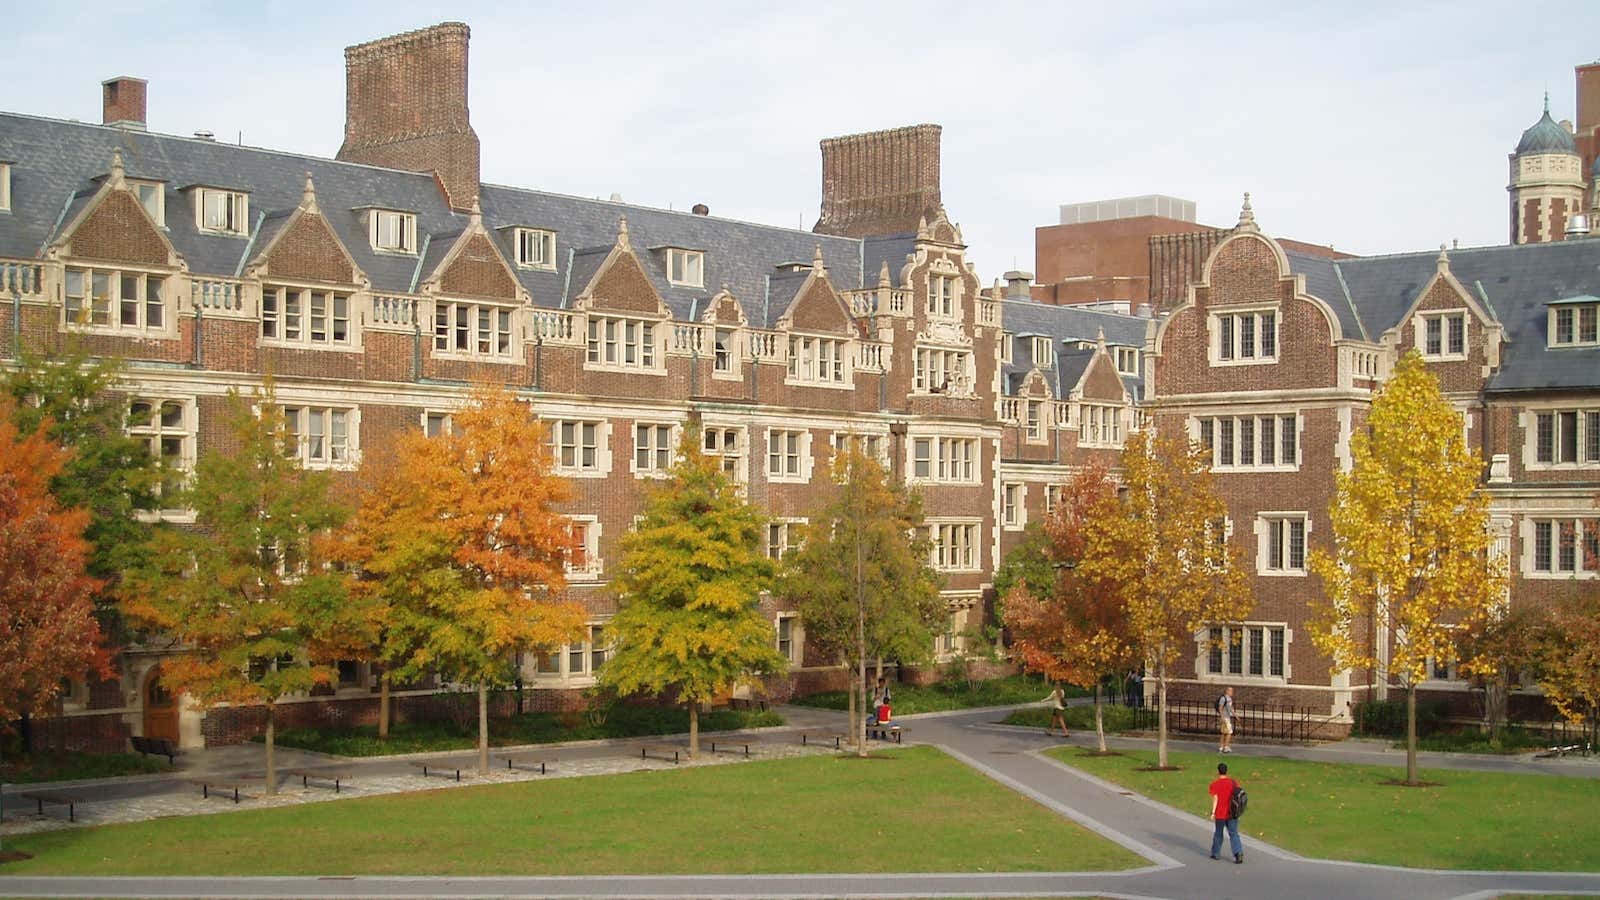 The quad at the University of Pennsylvania.